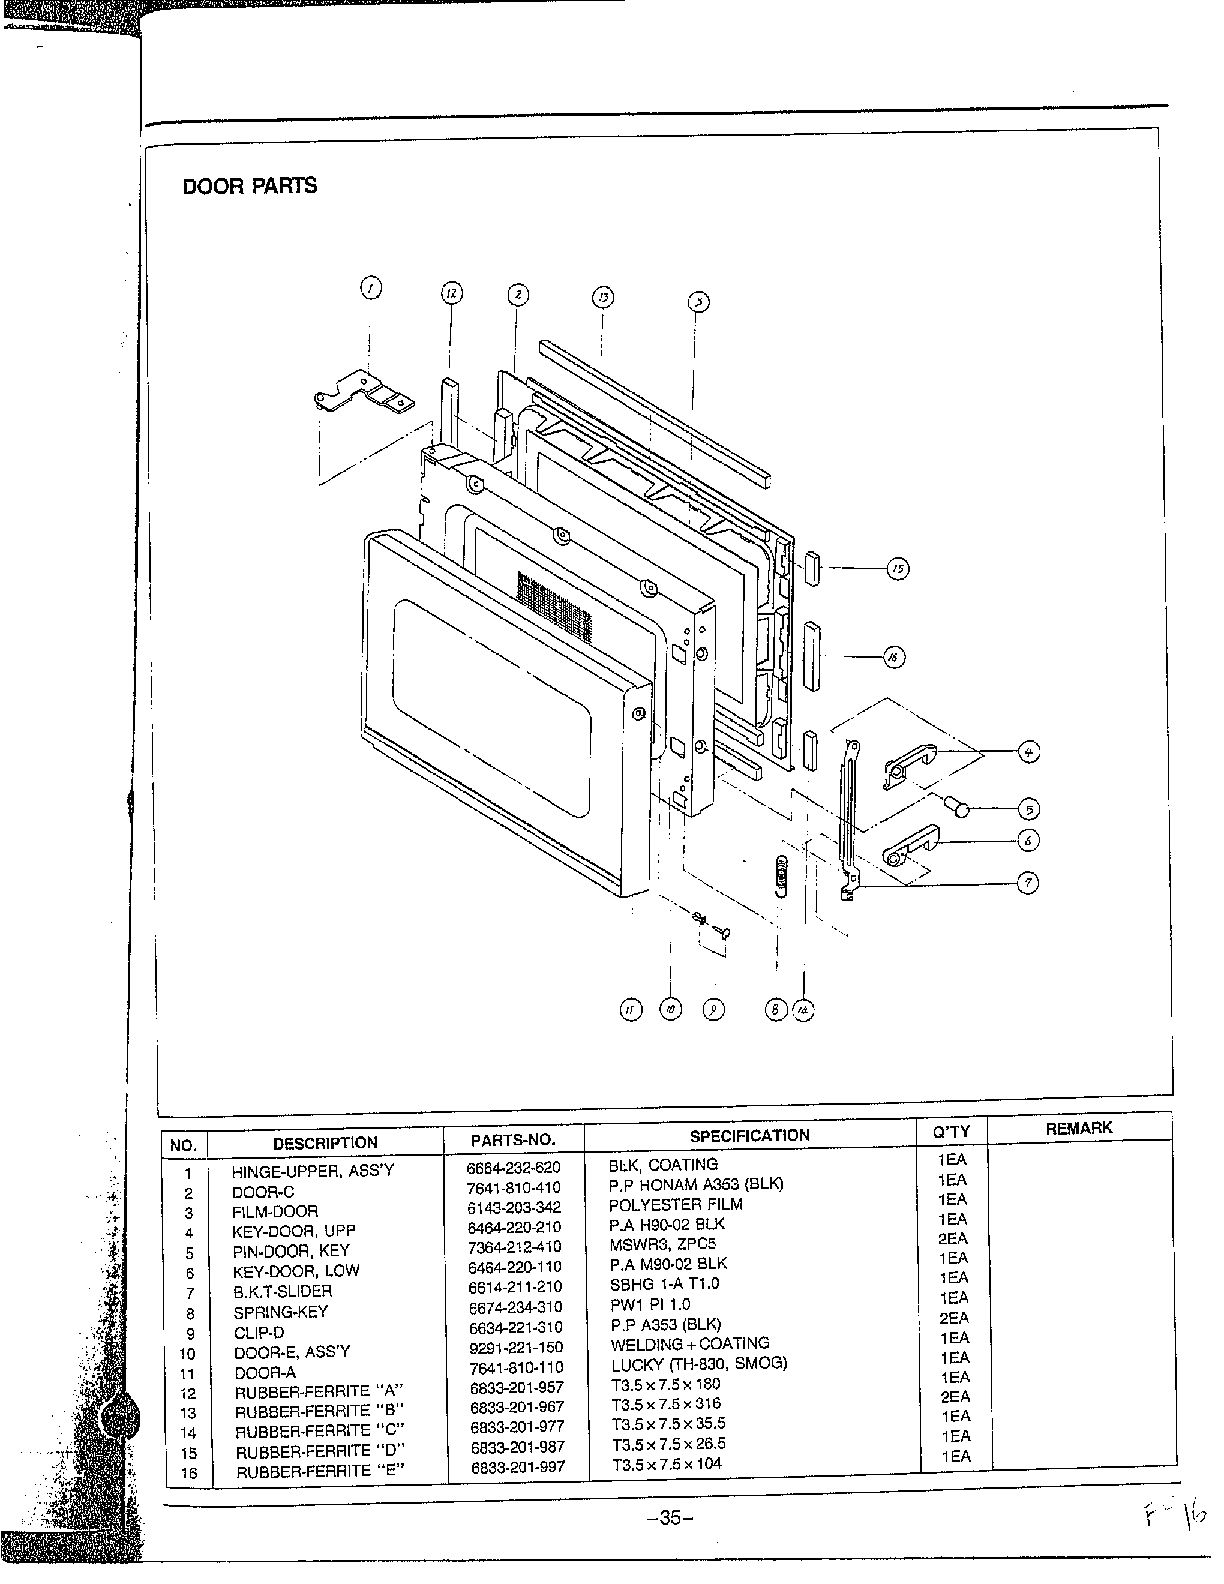 Circuit Diagram Of Samsung Microwave Oven